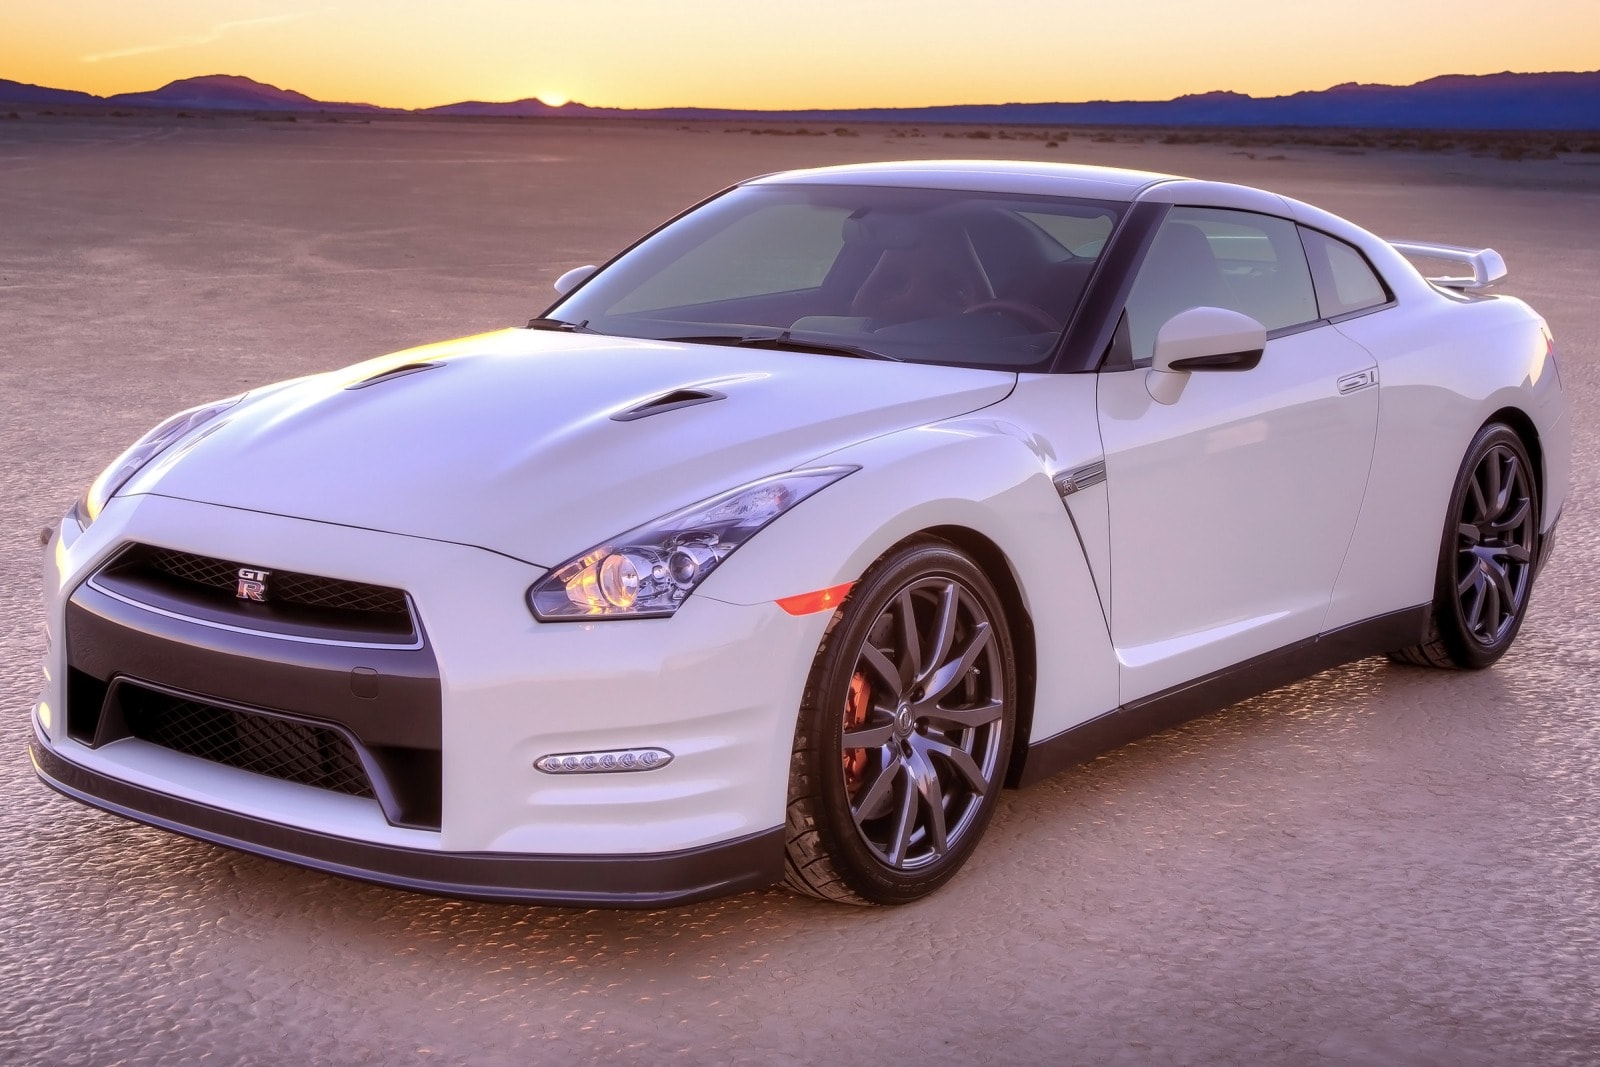 Used 2015 Nissan GT-R Coupe Review | Edmunds